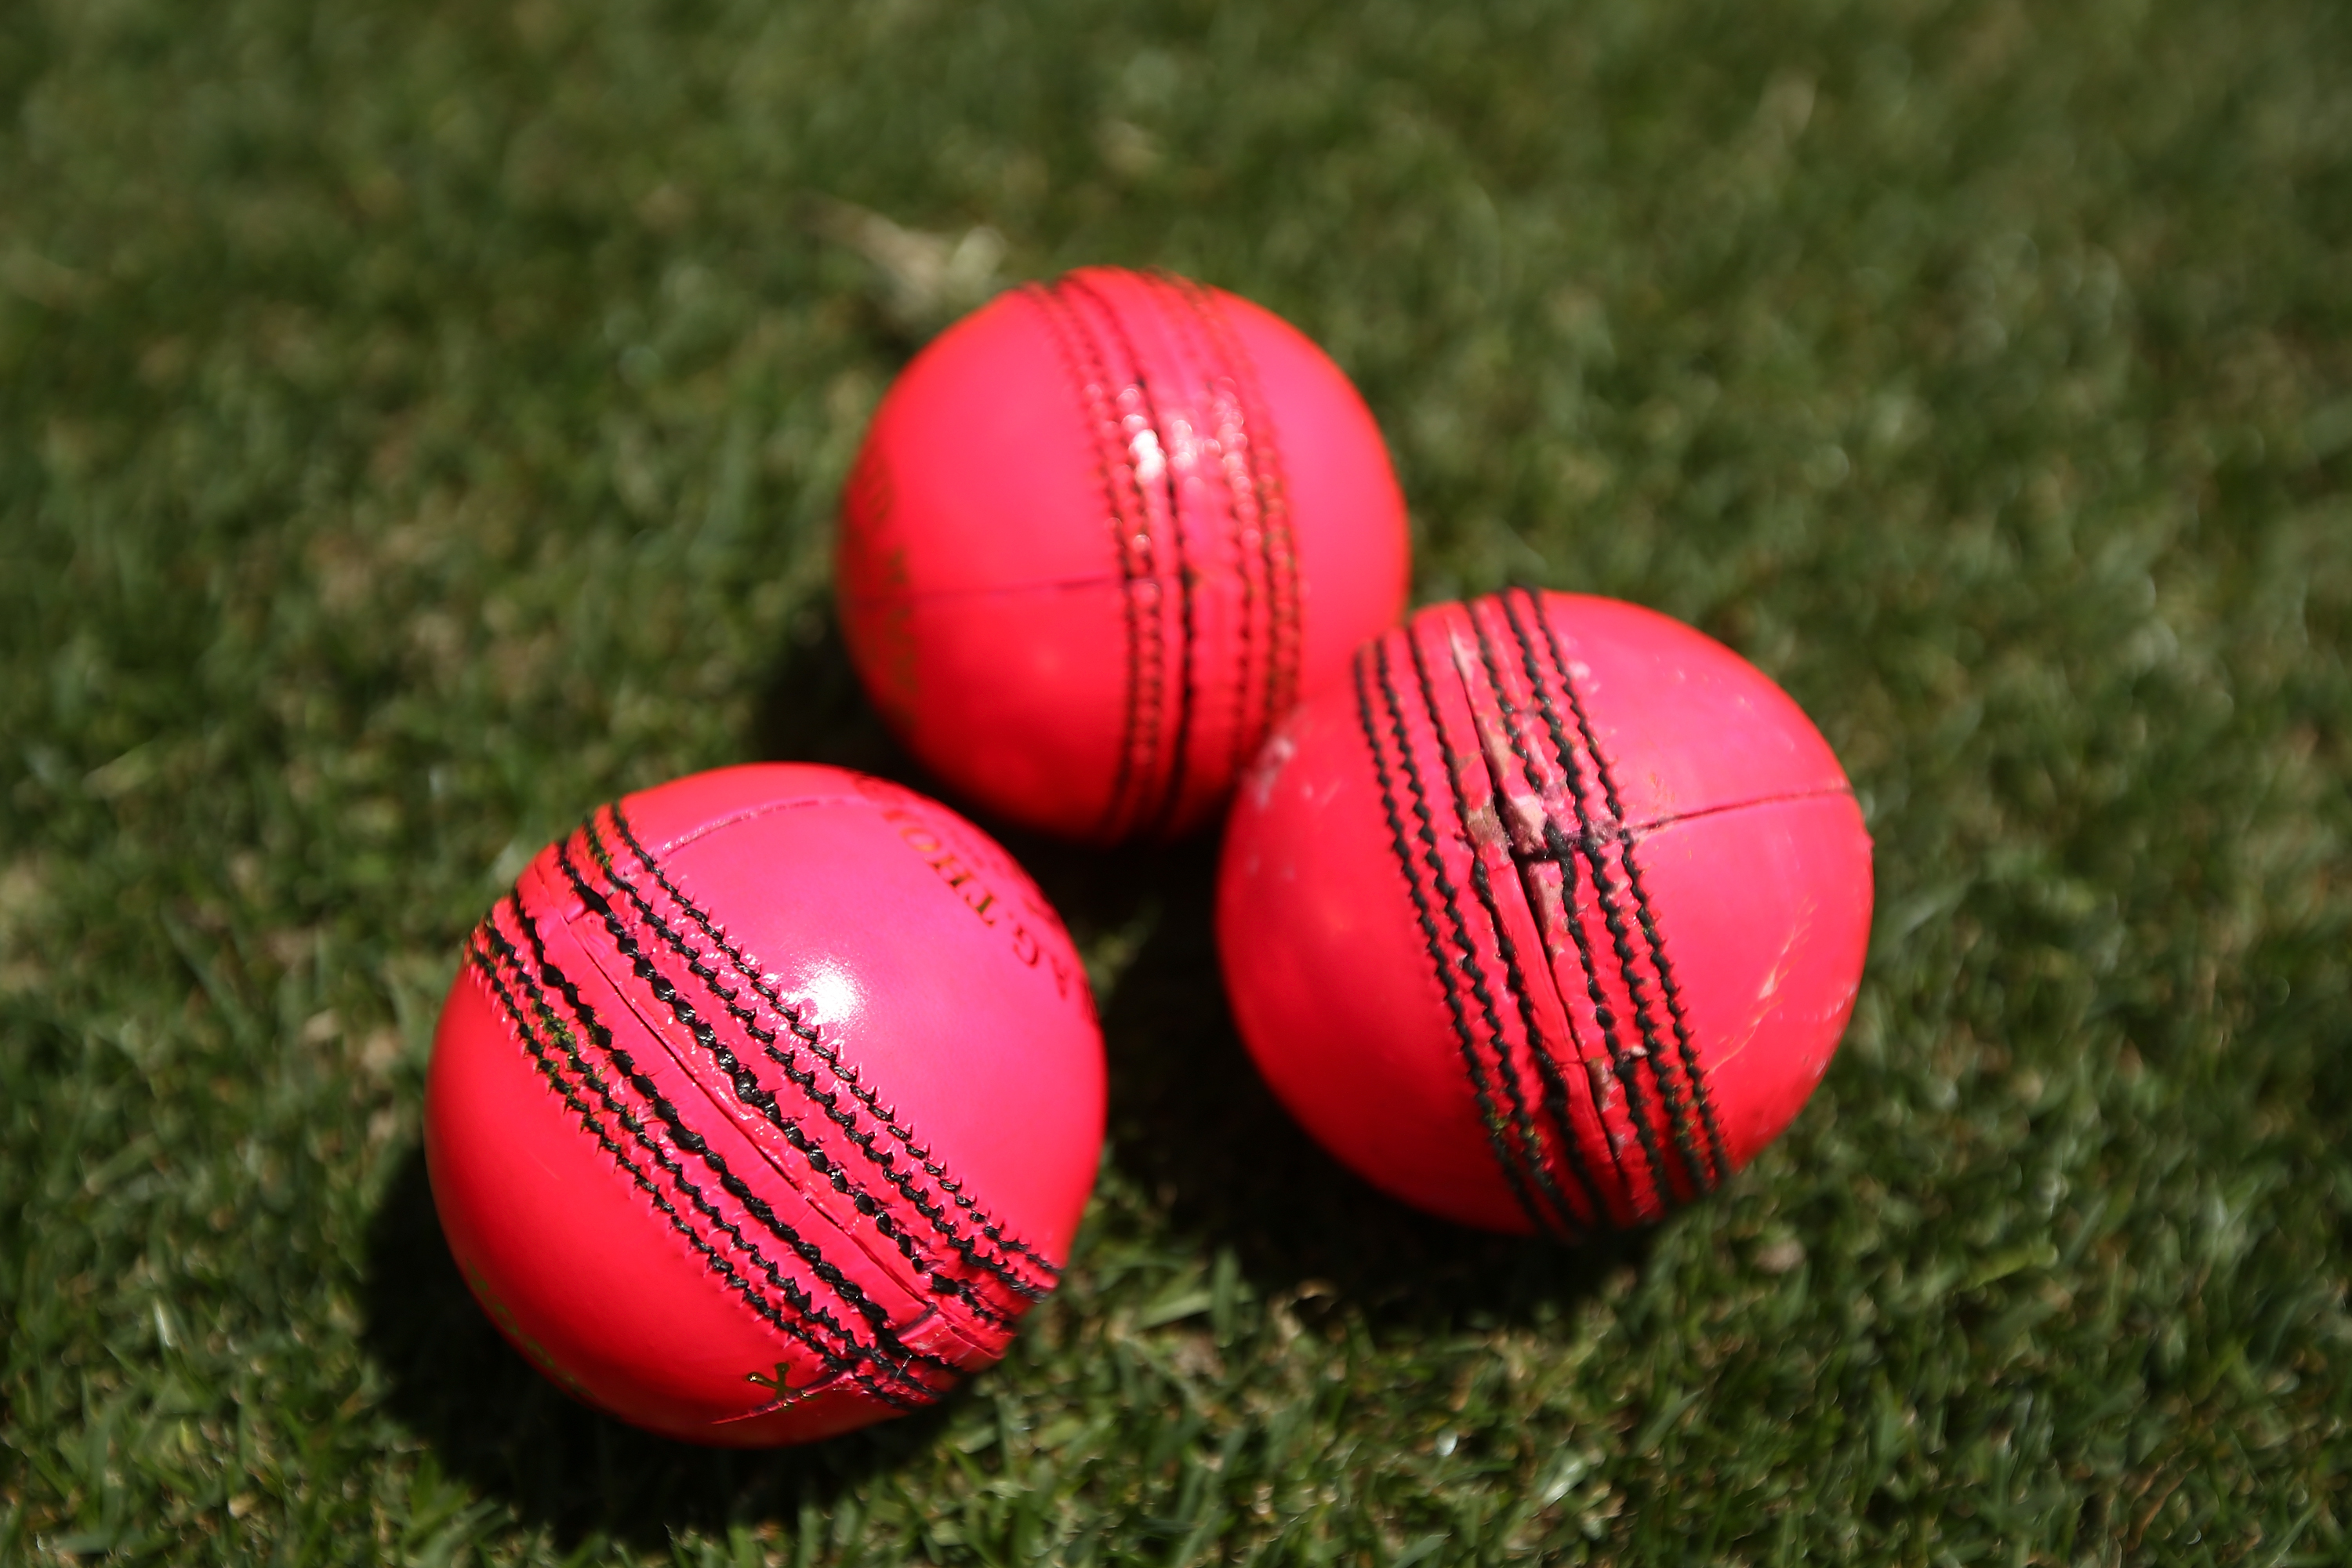 ICC pushes Al Jazeera to deliver proof of match-fixing claims as involved teams get enraged